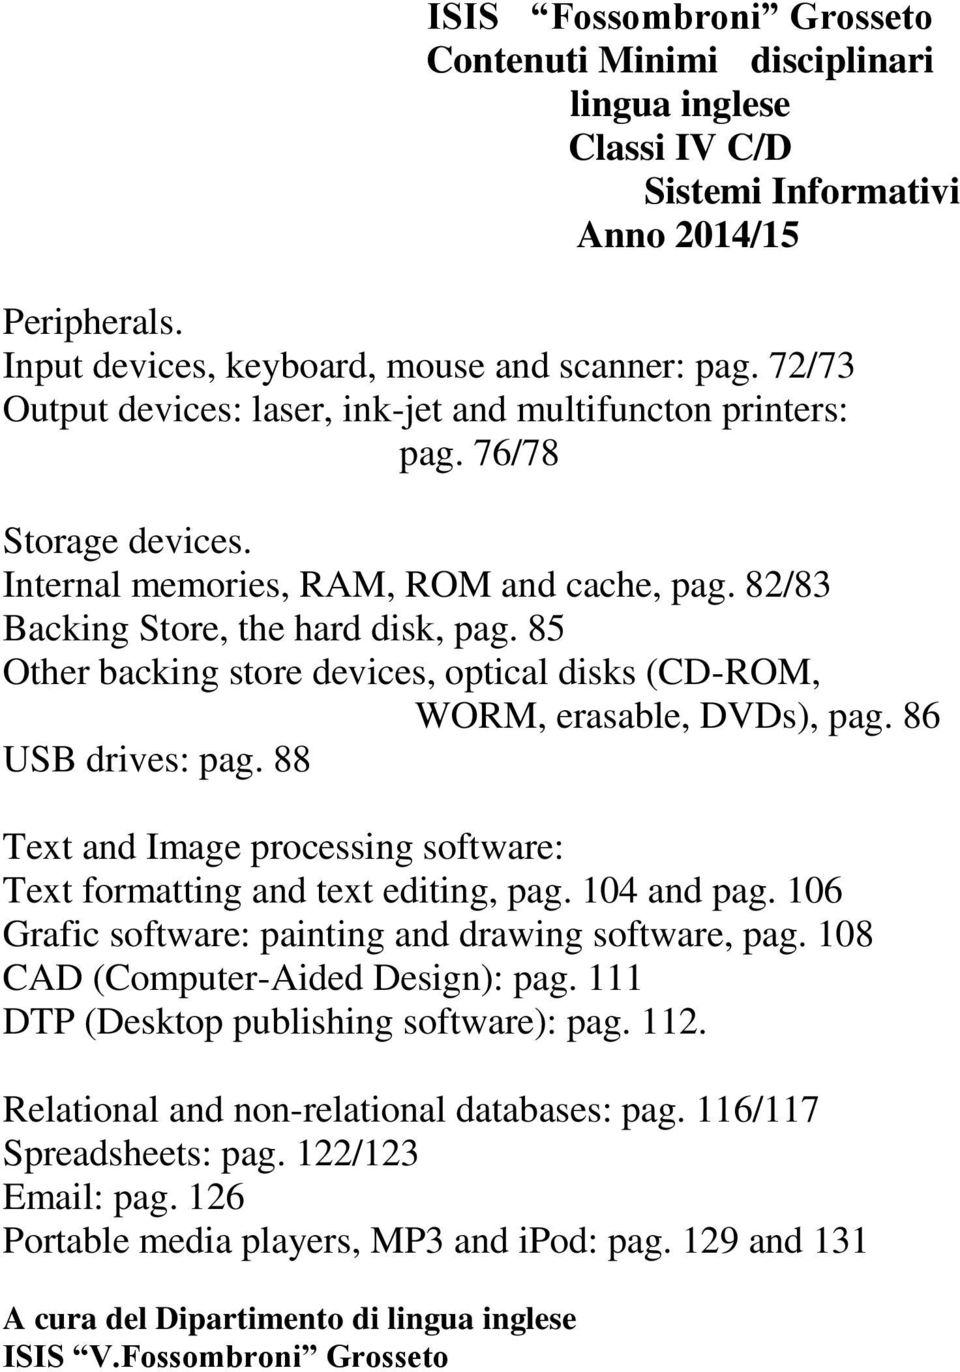 85 Other backing store devices, optical disks (CD-ROM, WORM, erasable, DVDs), pag. 86 USB drives: pag. 88 Text and Image processing software: Text formatting and text editing, pag. 104 and pag.